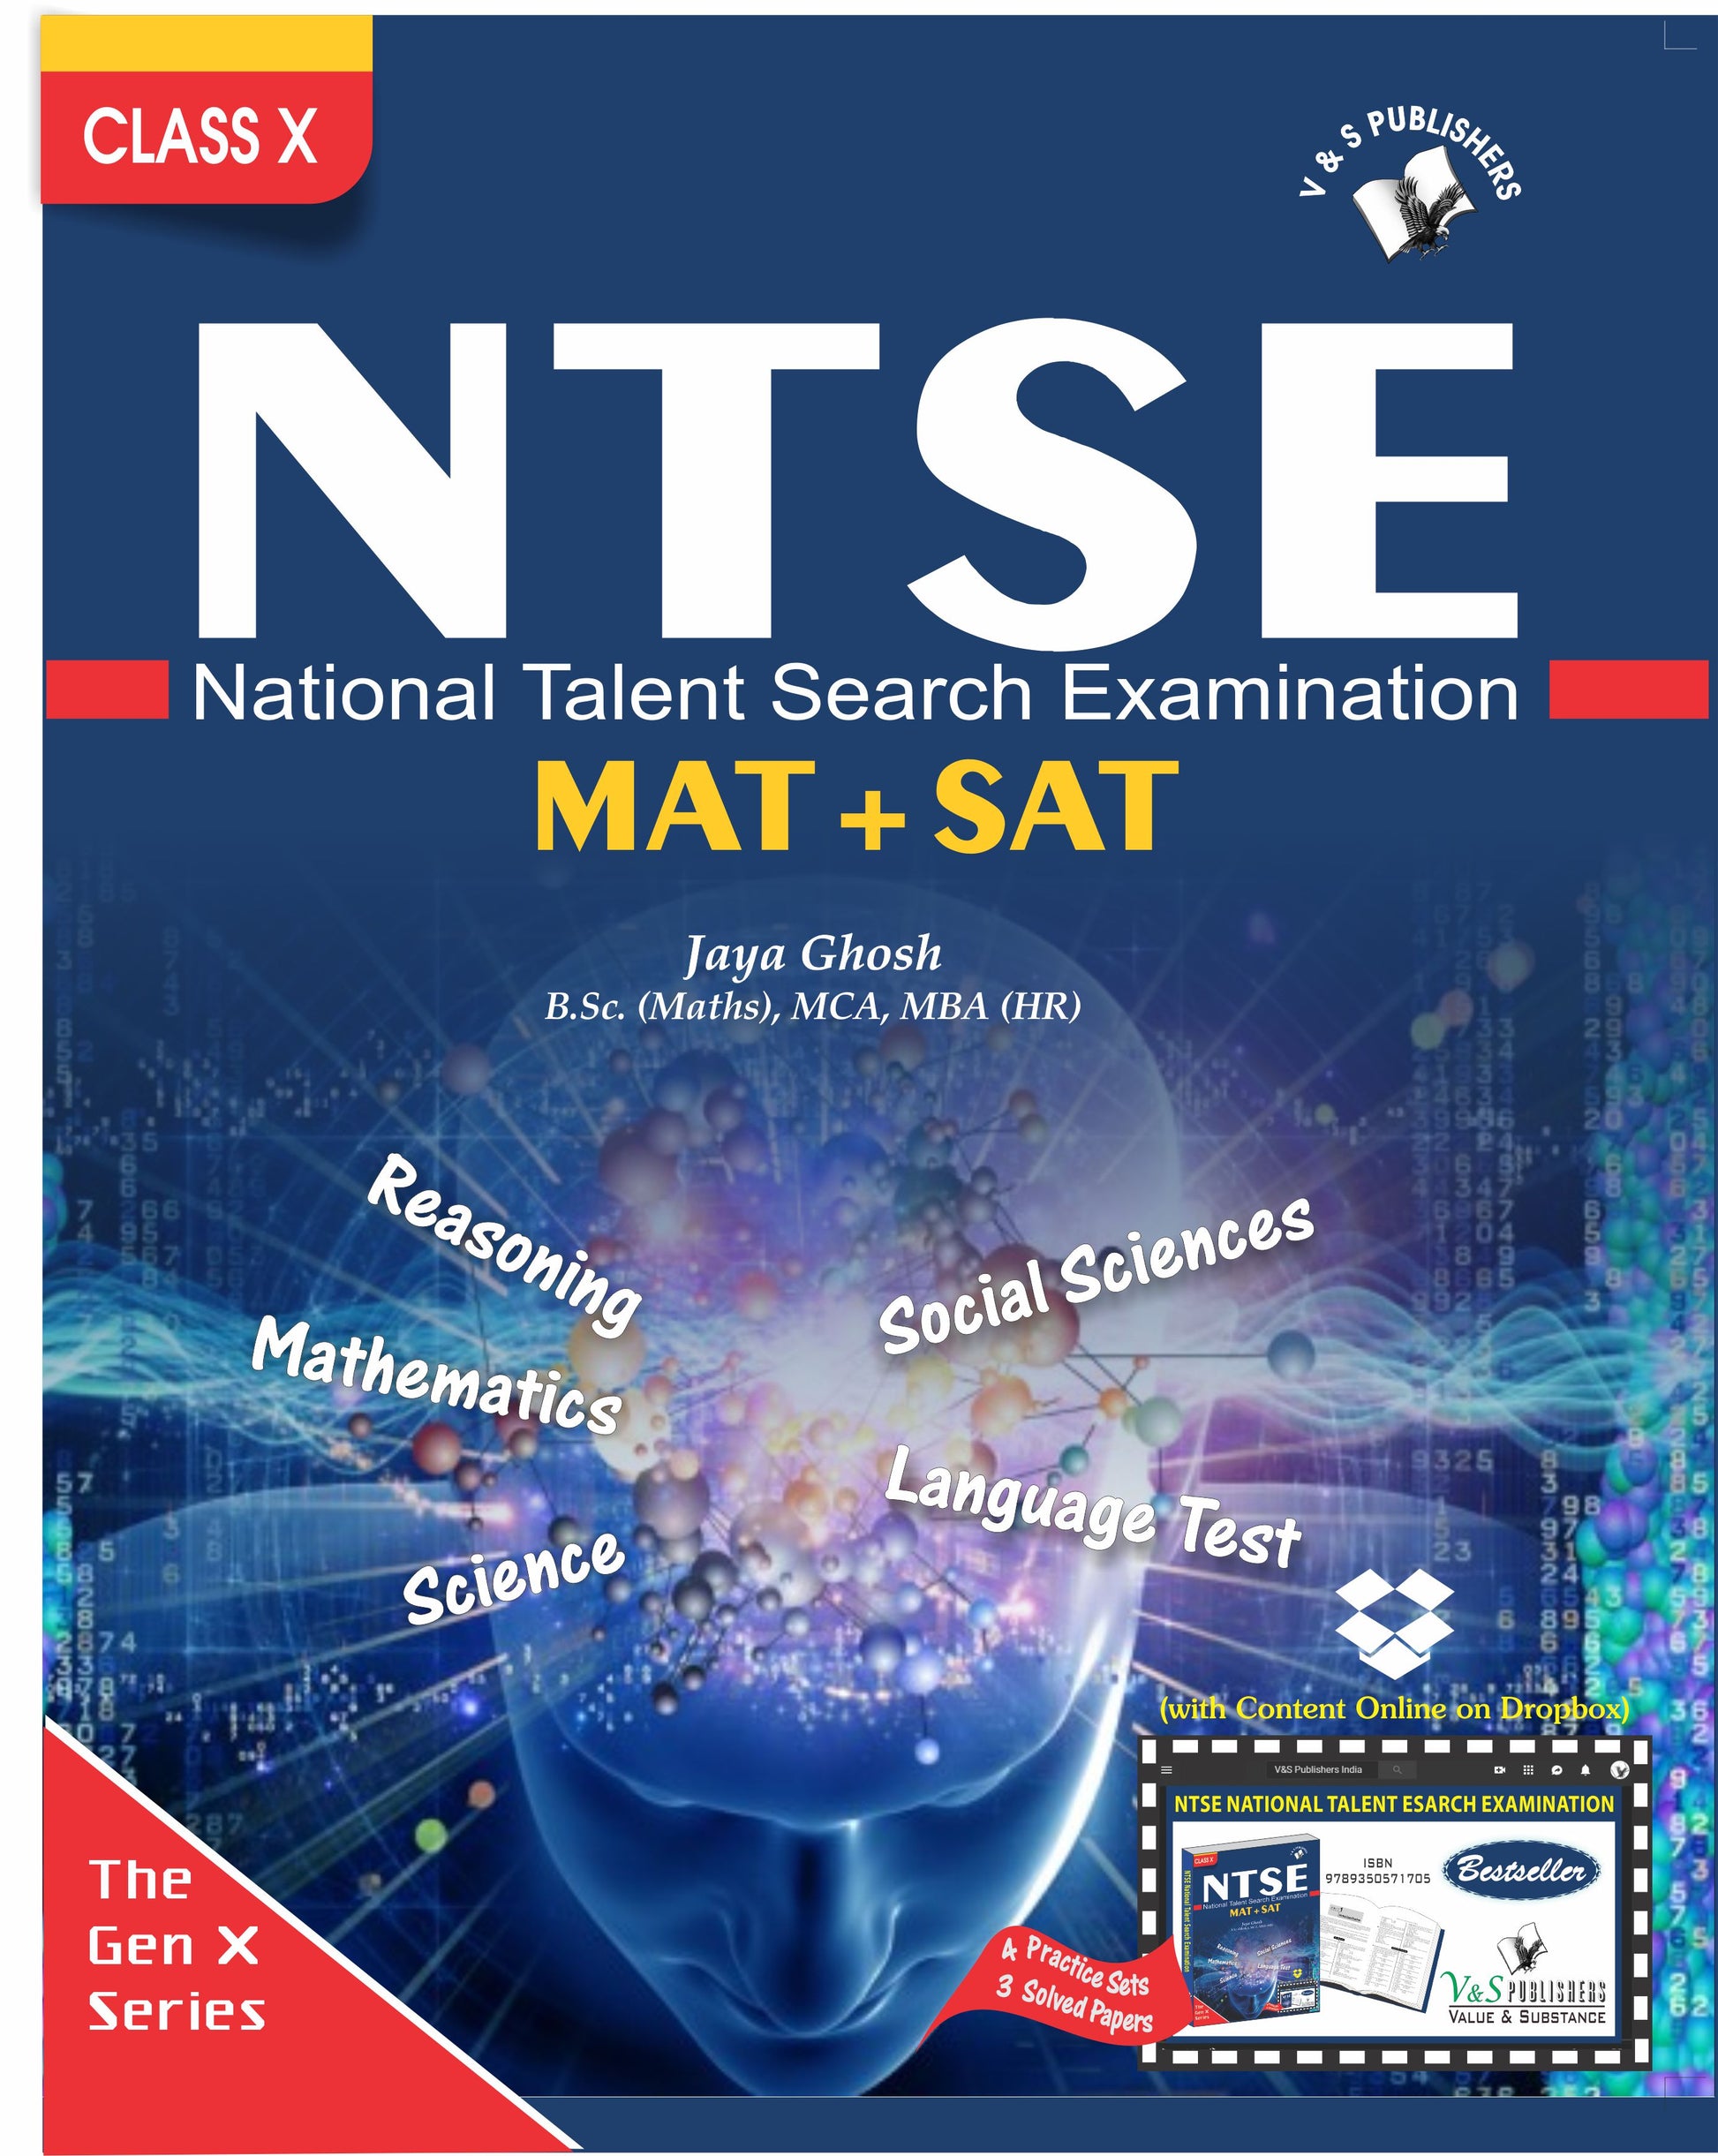 NTSE  National Talent Search Examination (With Online Content on Dropbox)